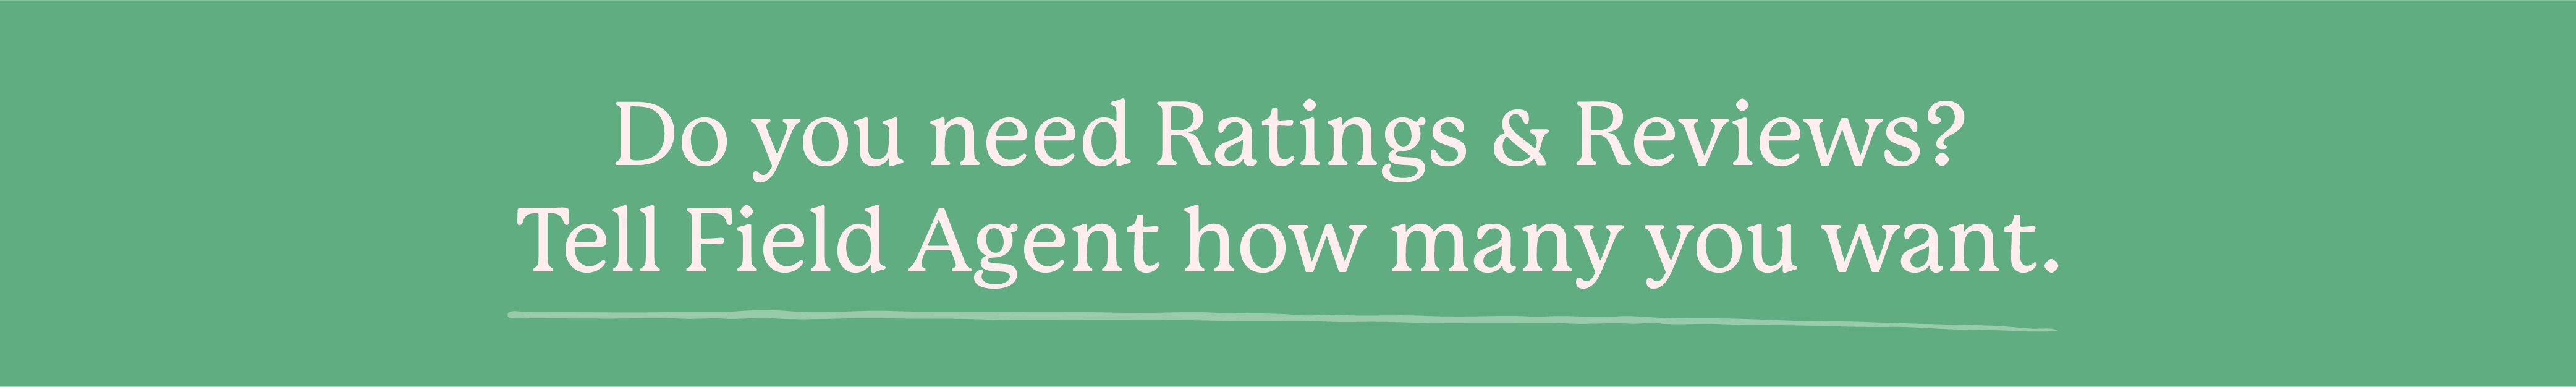 Do you need Ratings and Reviews? Tell Field Agent how many you want